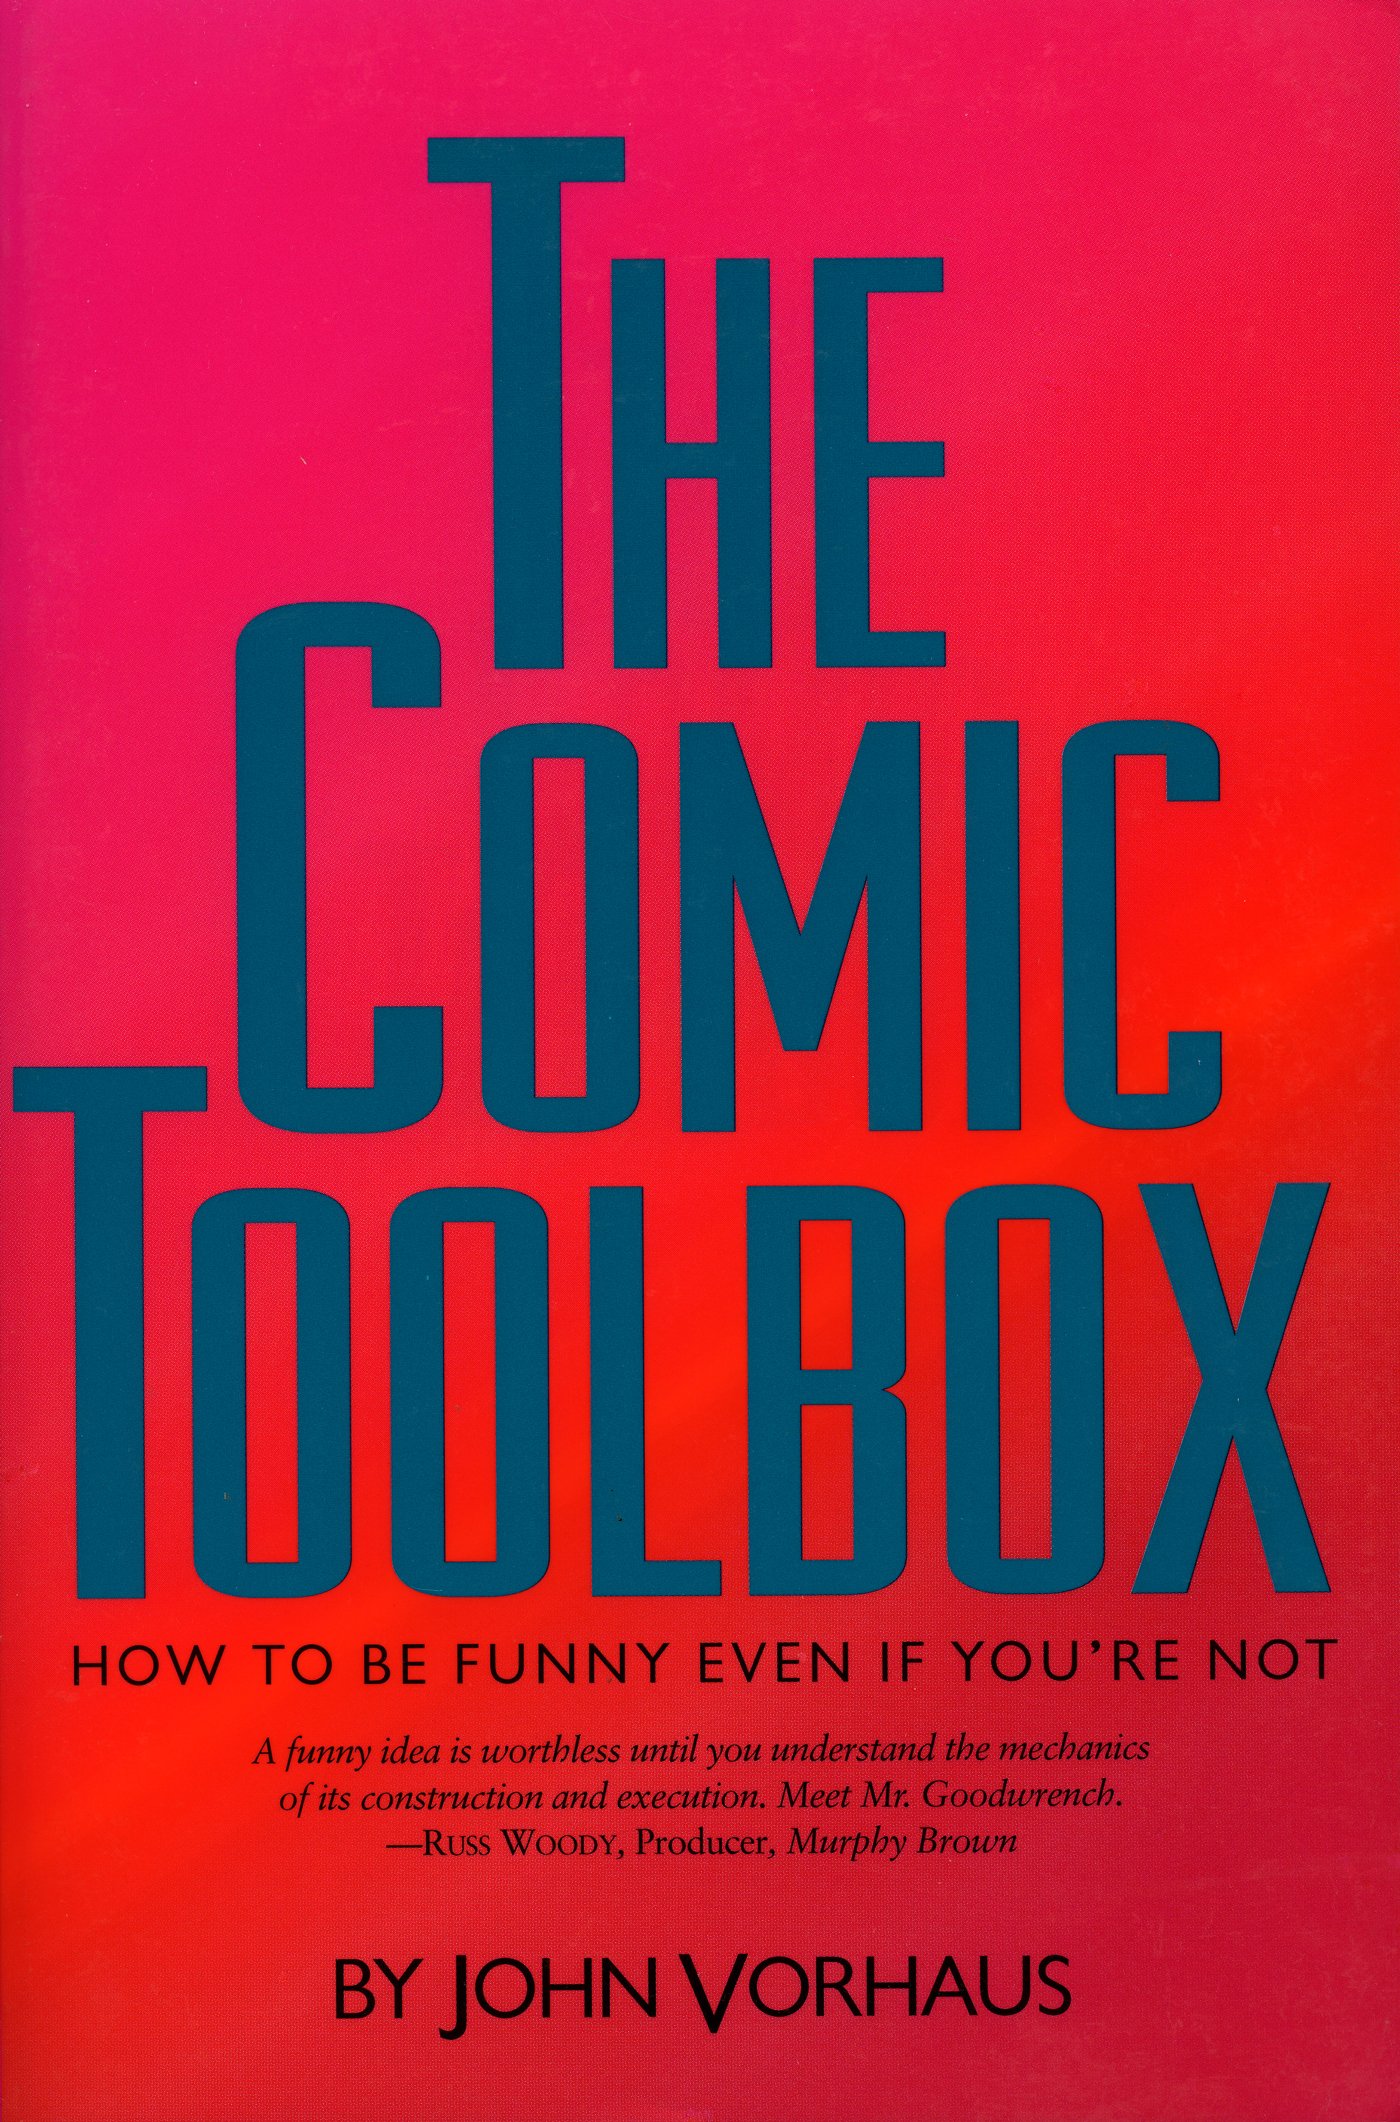 The Comic Toolbox: How to be Funny Even If You're Not